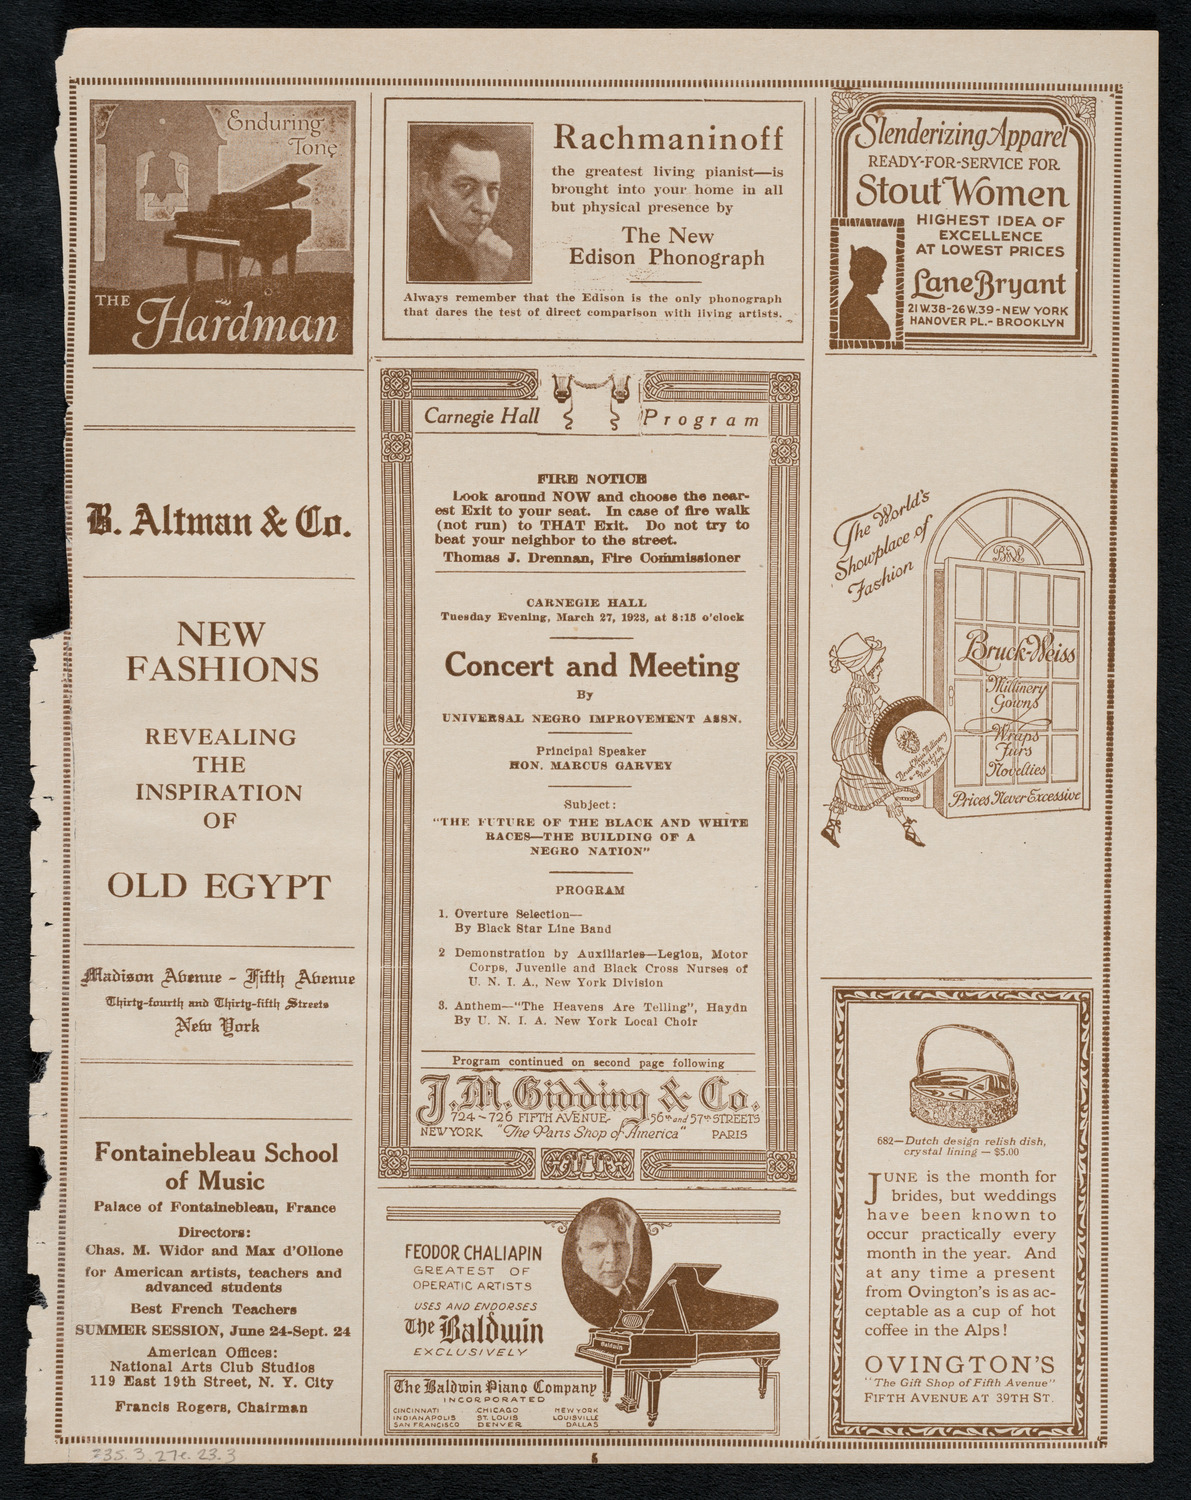 Universal Negro Improvement Association Meeting and Concert, March 27, 1923, program page 5